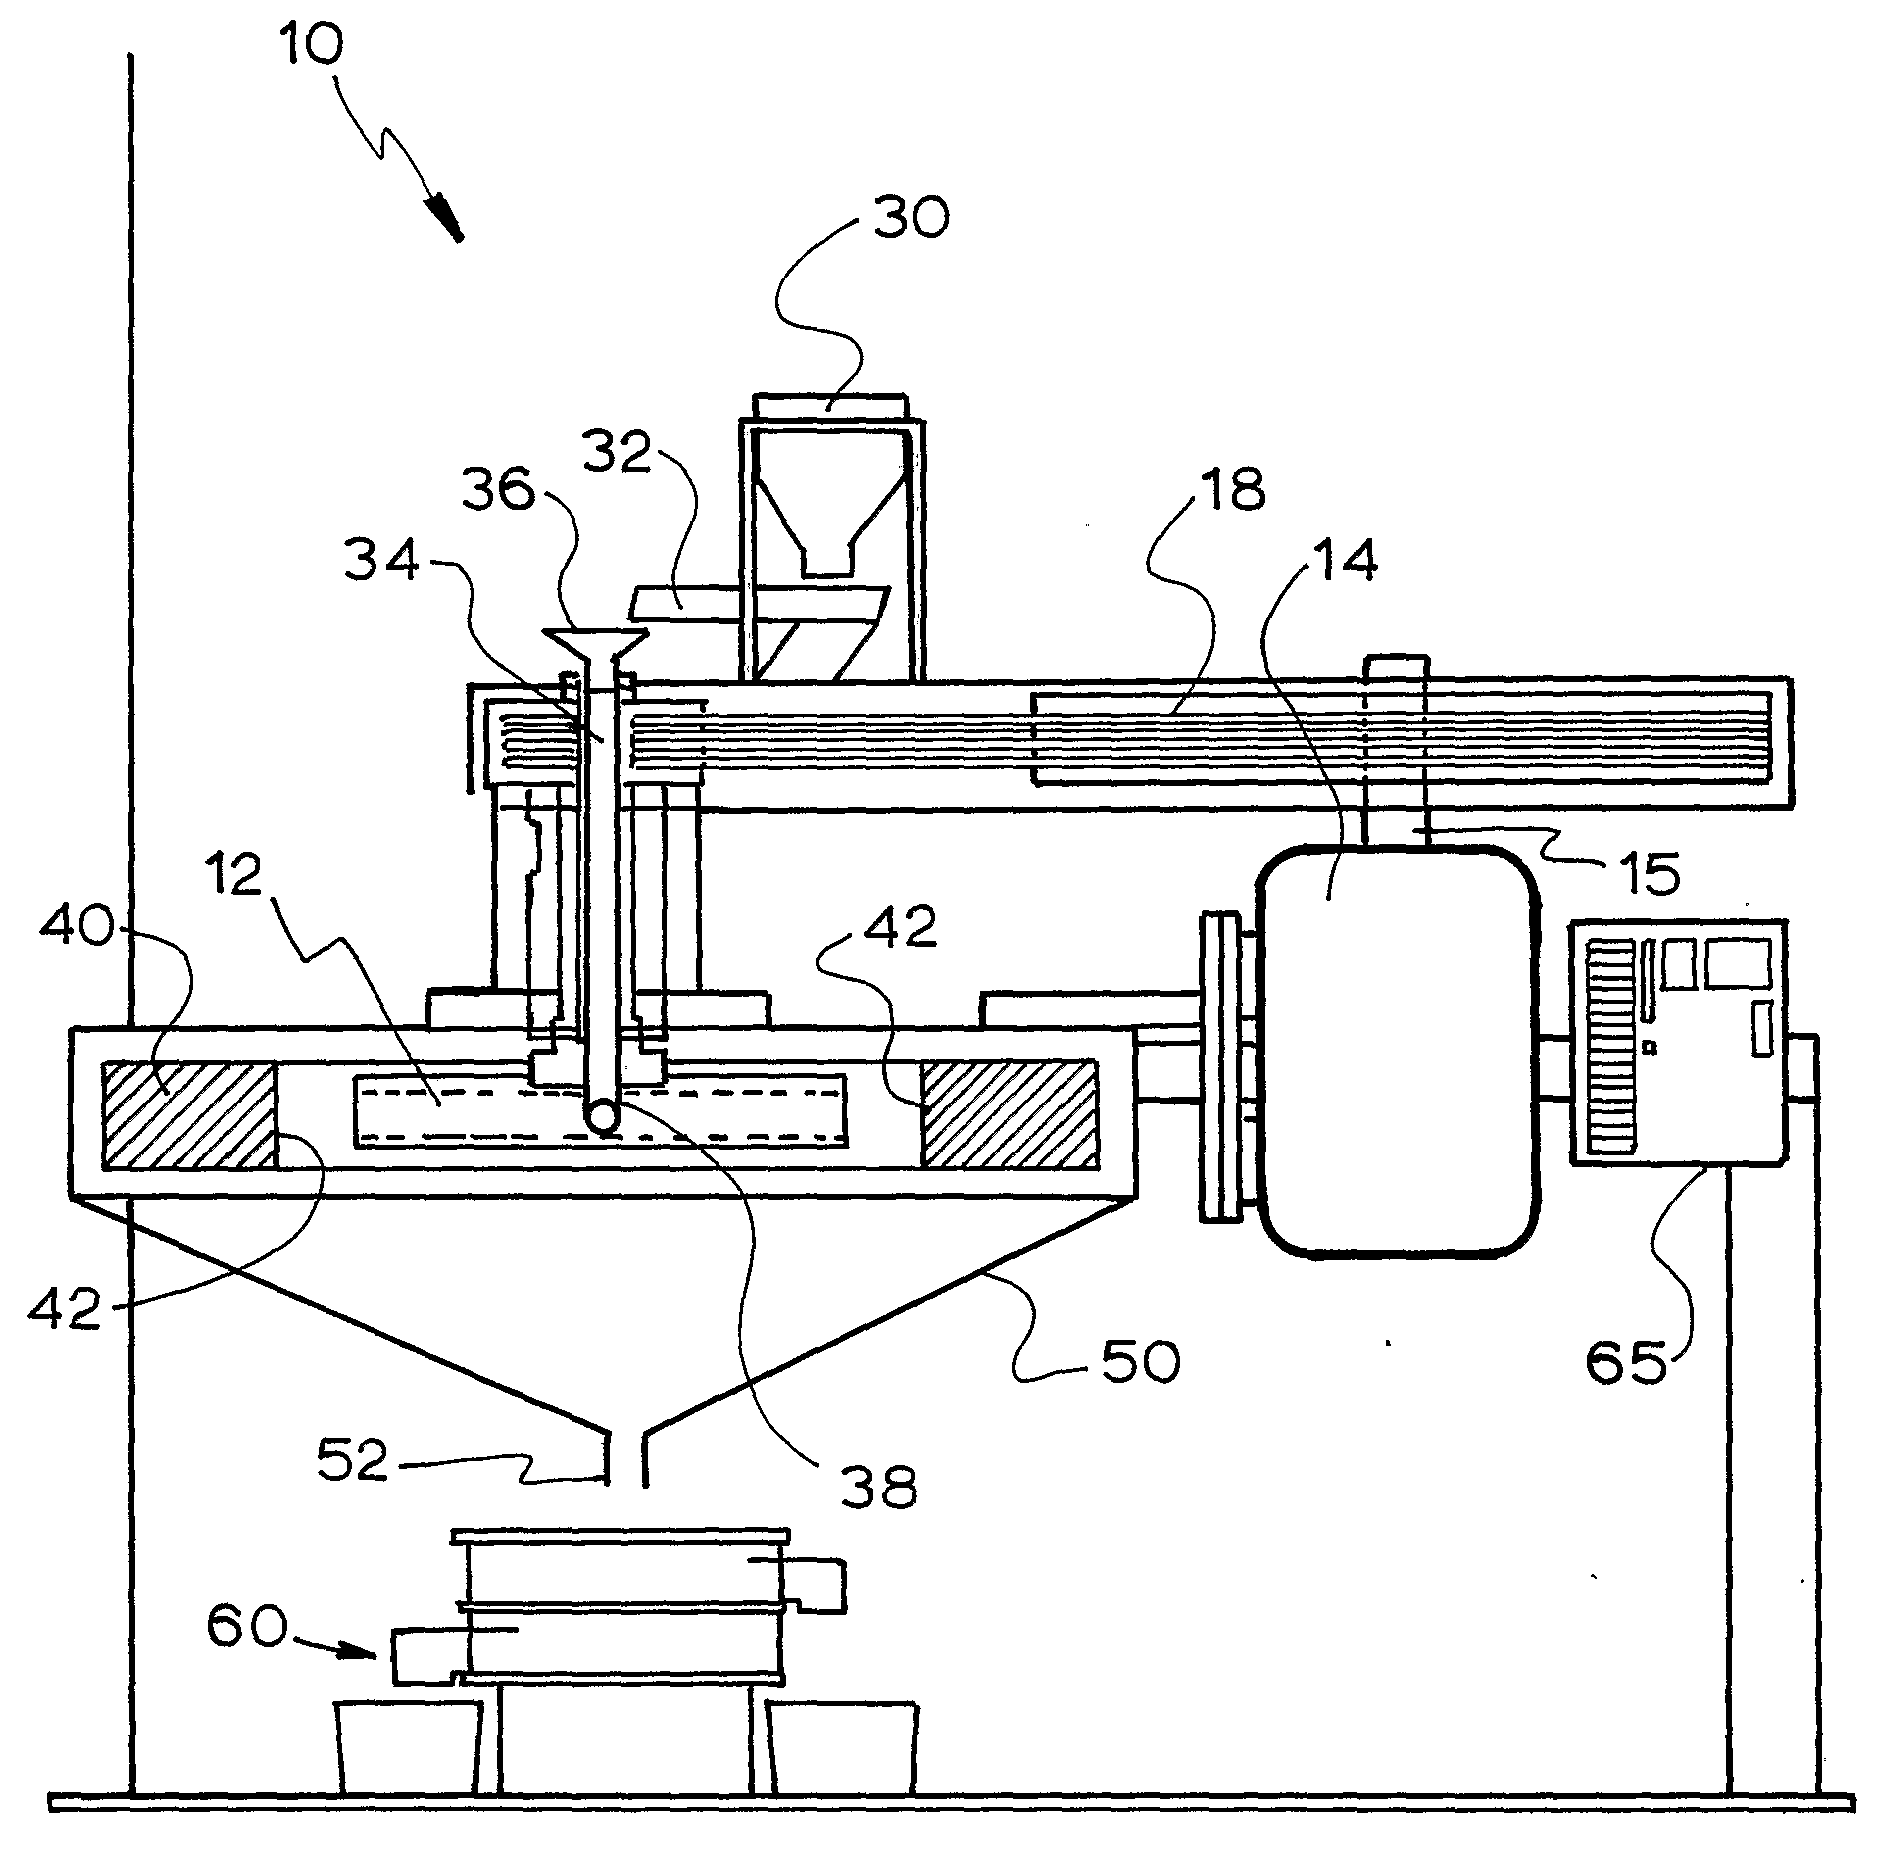 Apparatus for Determining Breakage Properties of Particulate Material